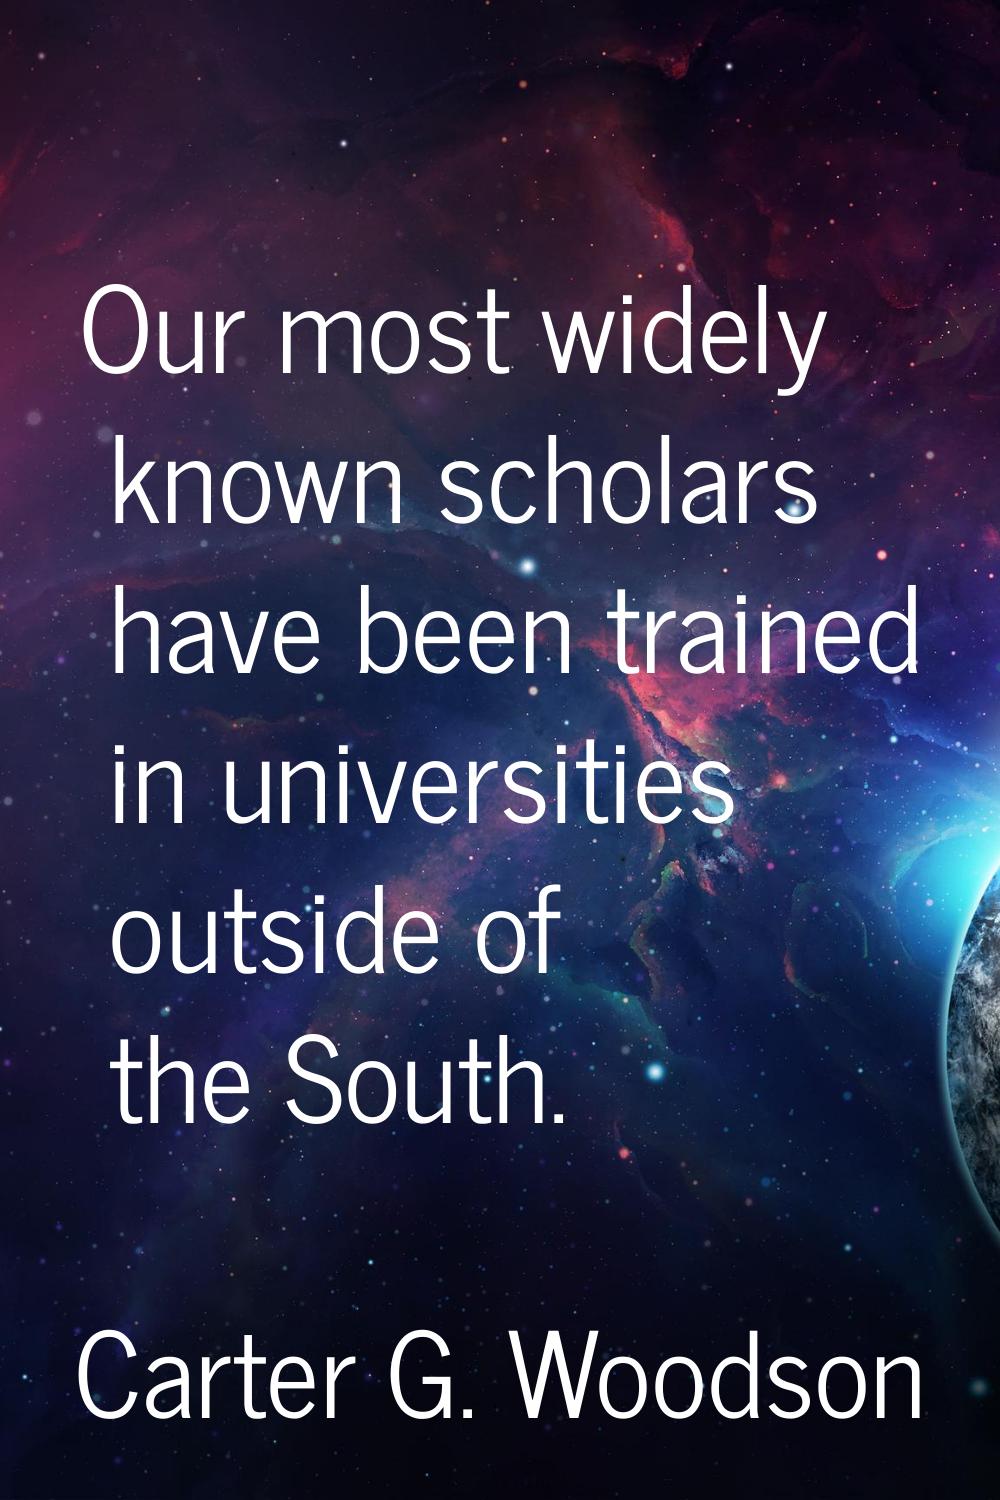 Our most widely known scholars have been trained in universities outside of the South.